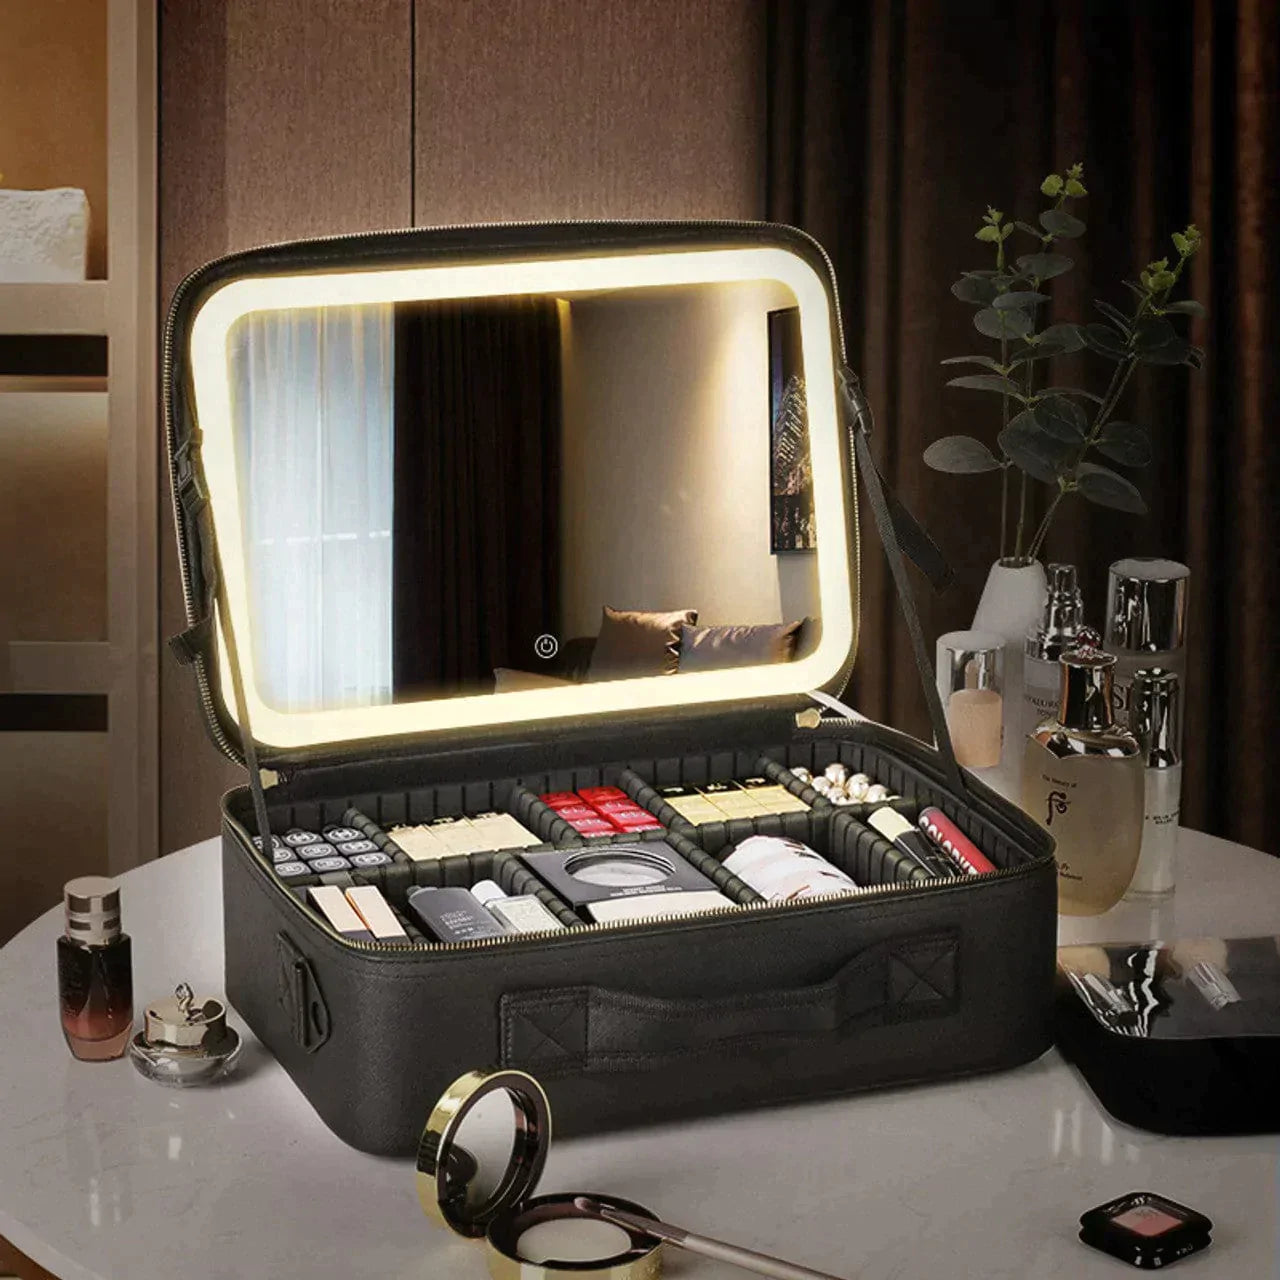 Fably make-up bag with LED mirror